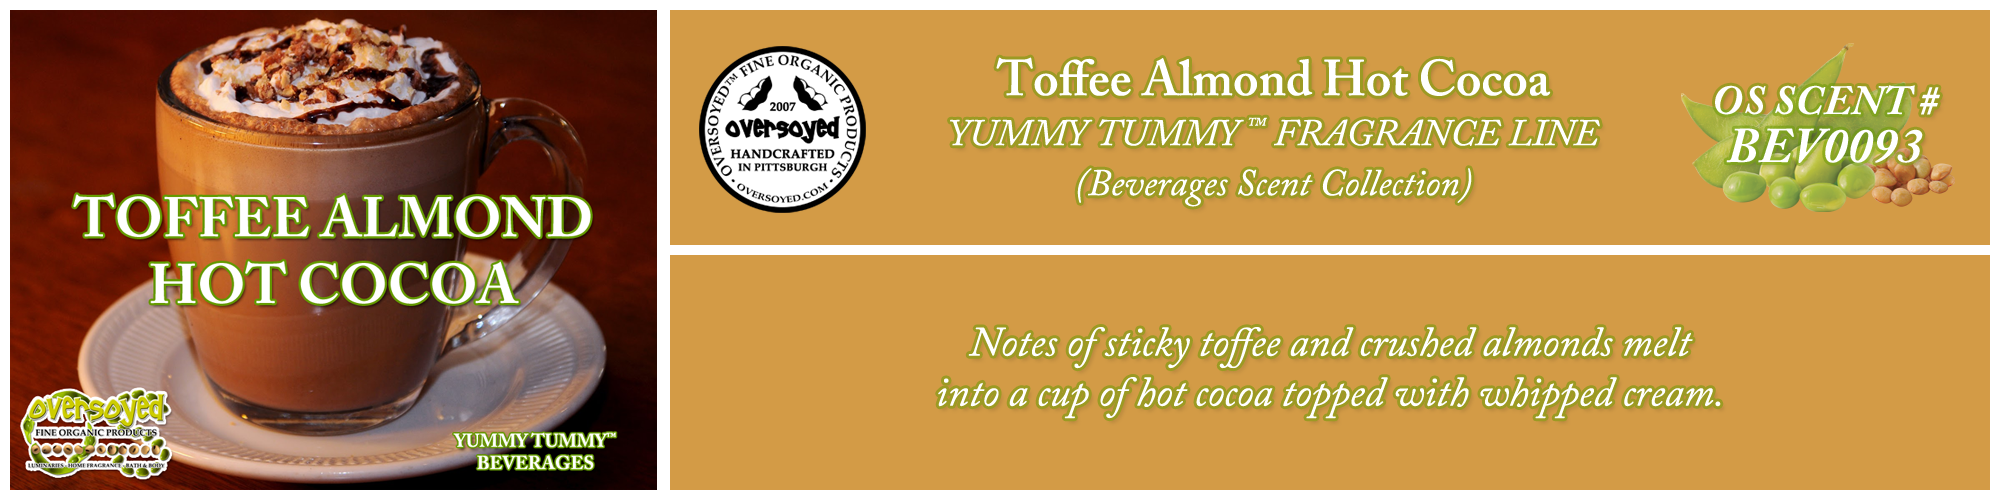 Toffee Almond Hot Cocoa Handcrafted Products Collection